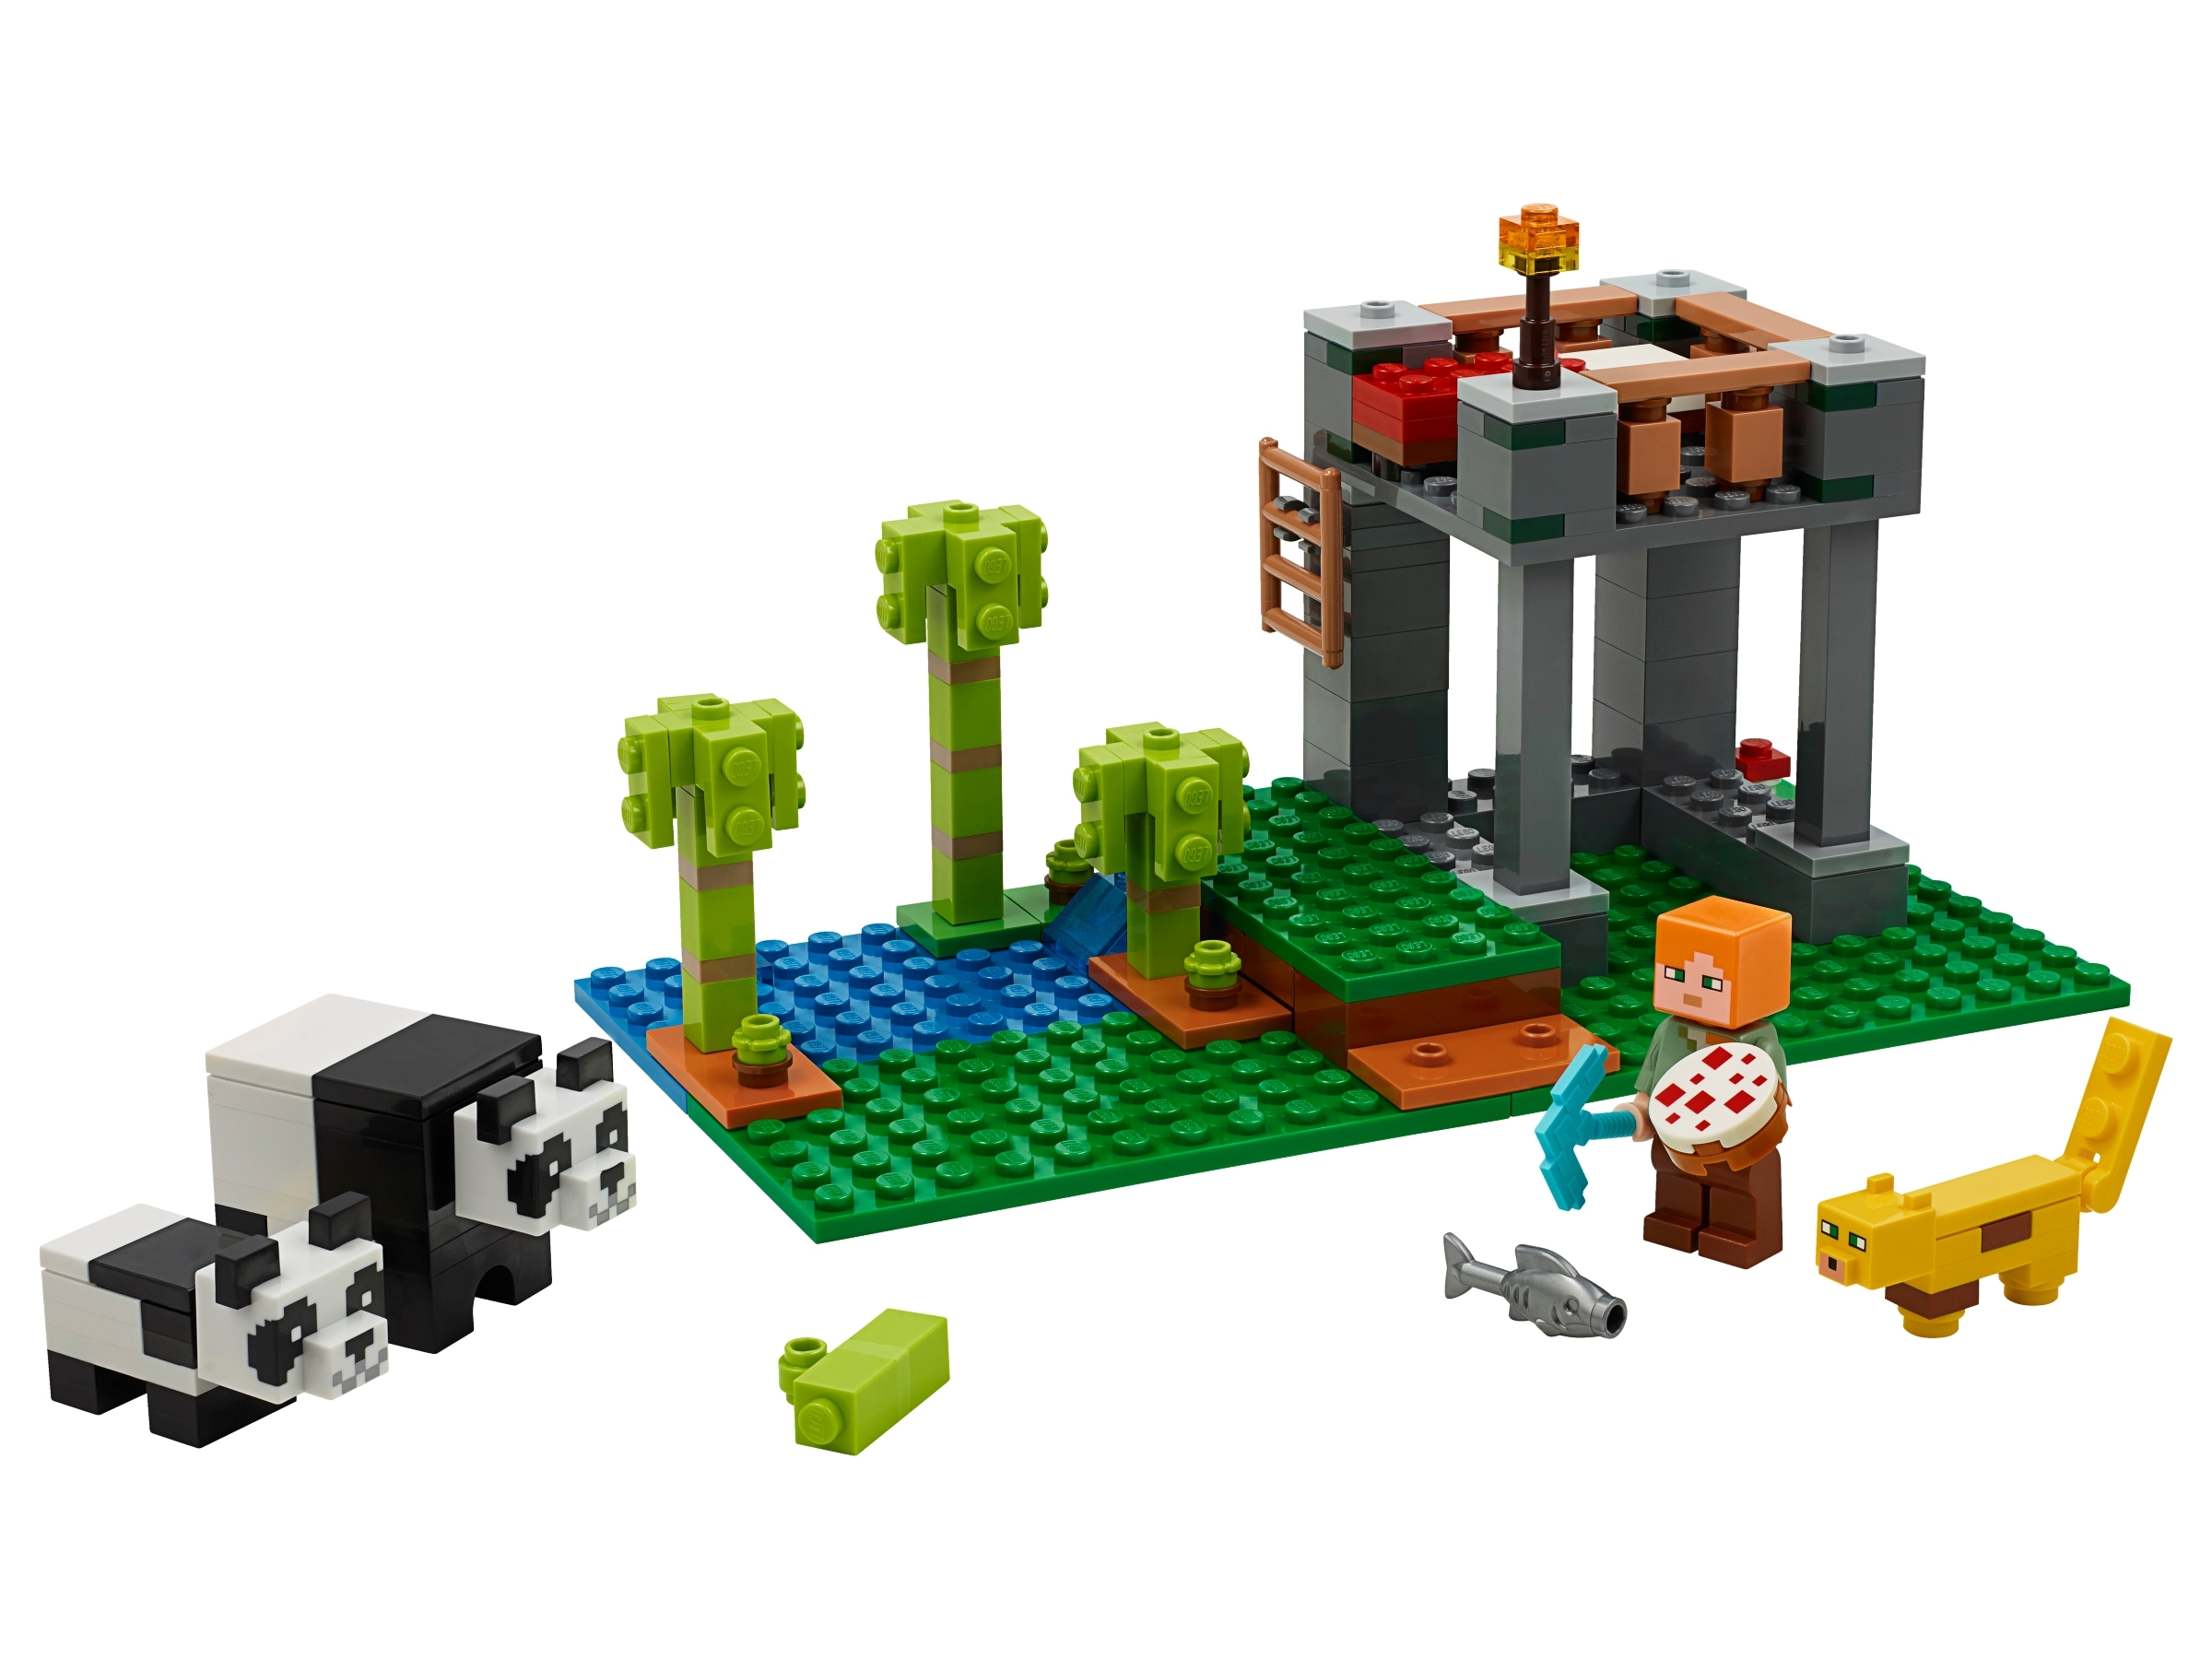 The Panda Nursery Minecraft Buy Online At The Official Lego Shop Us